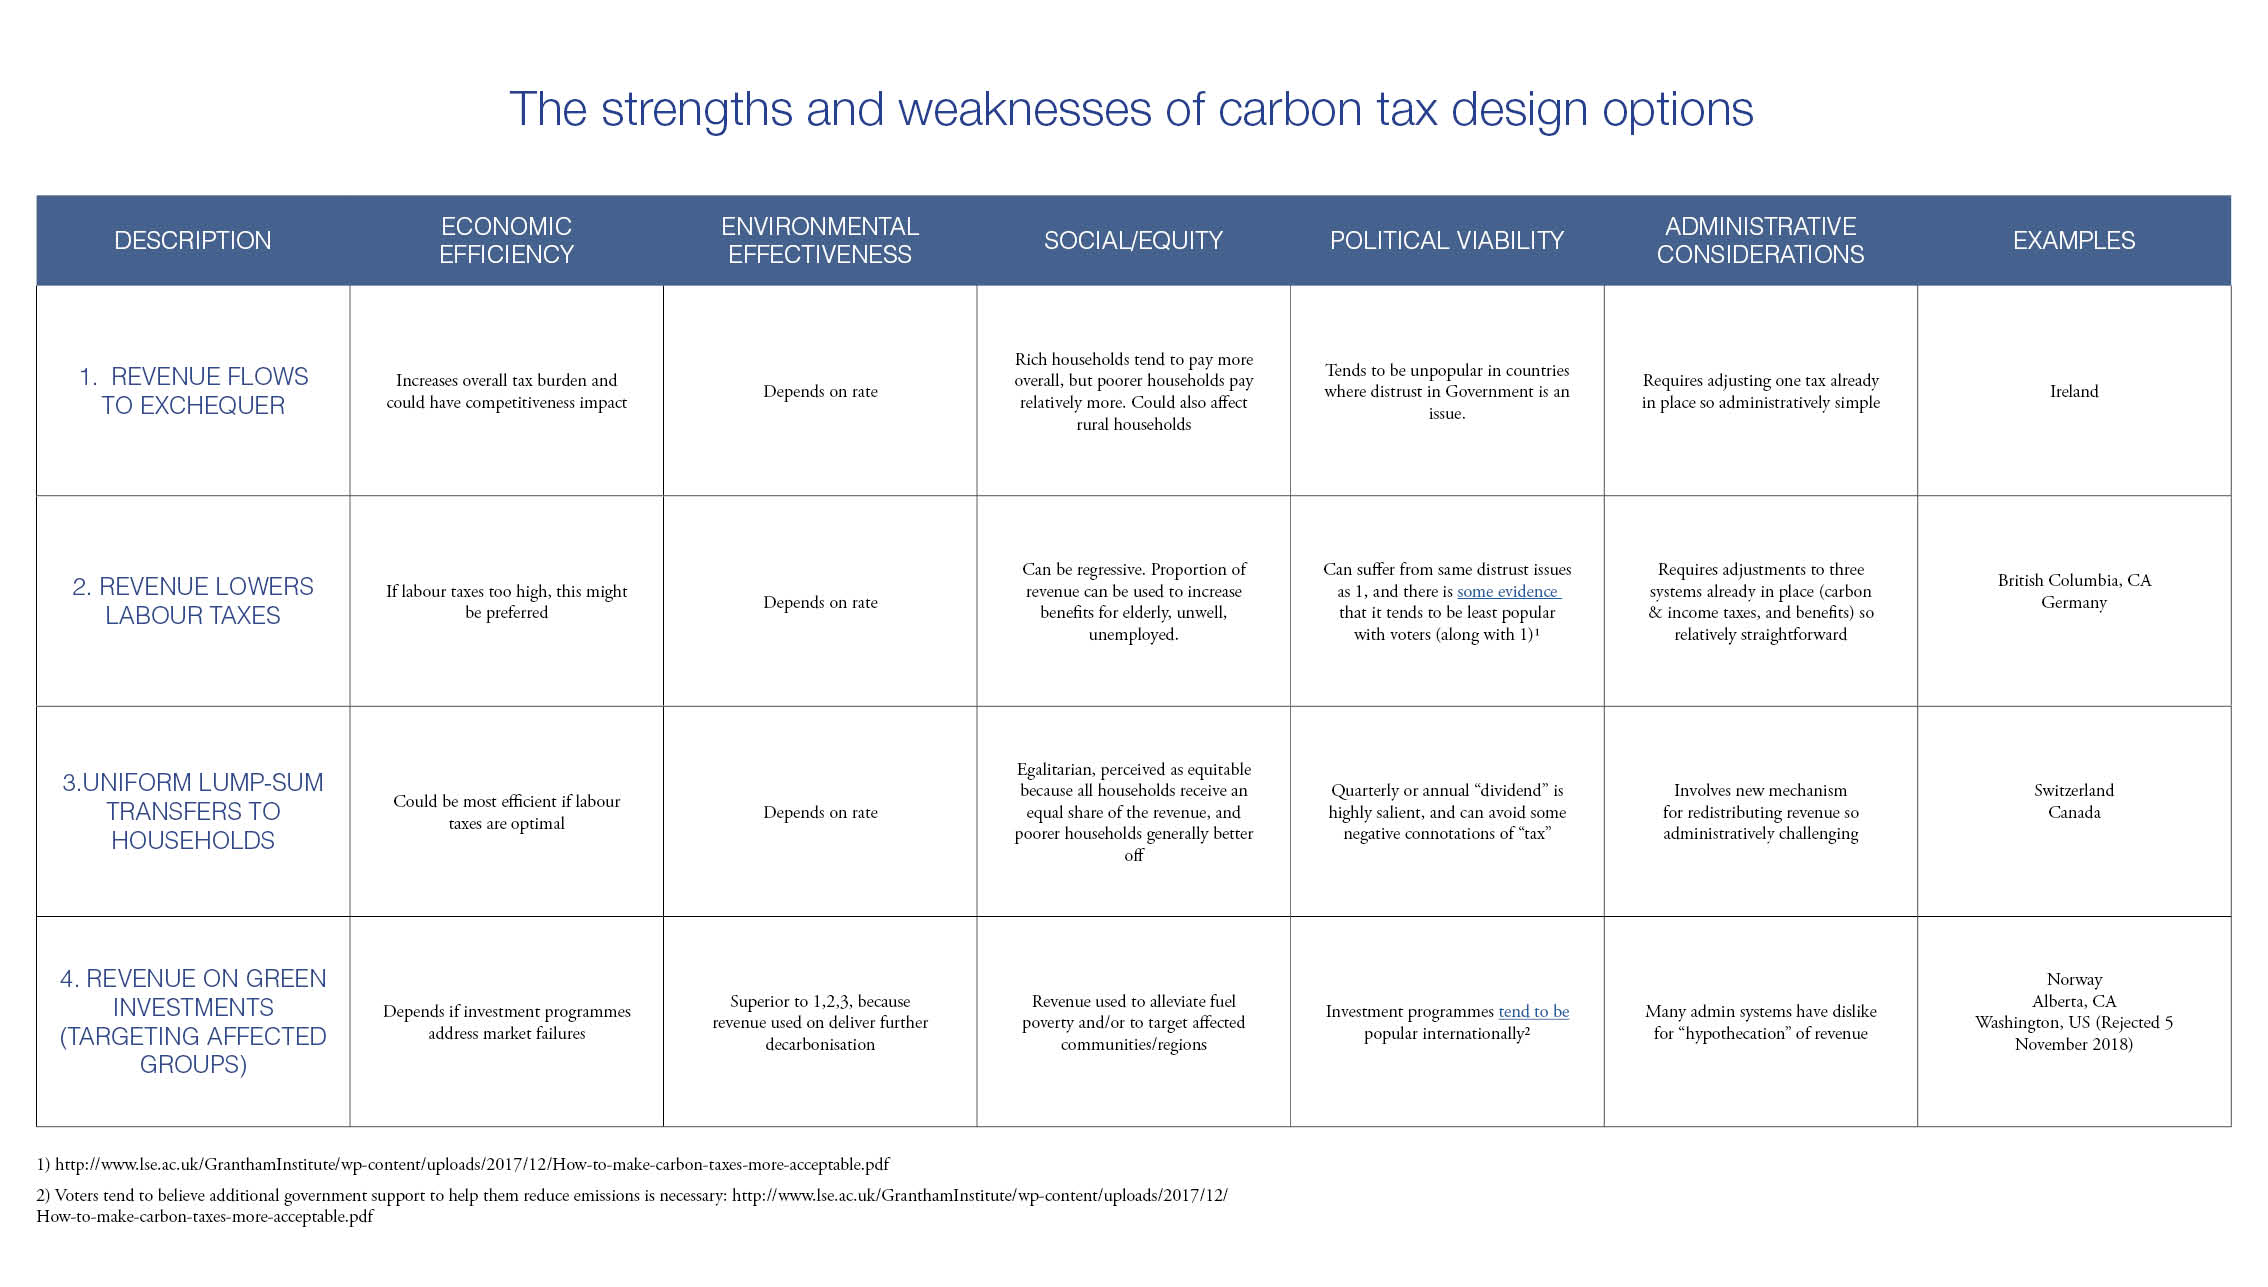 pragmatism-over-purism-how-to-design-a-carbon-tax-to-win-political-and